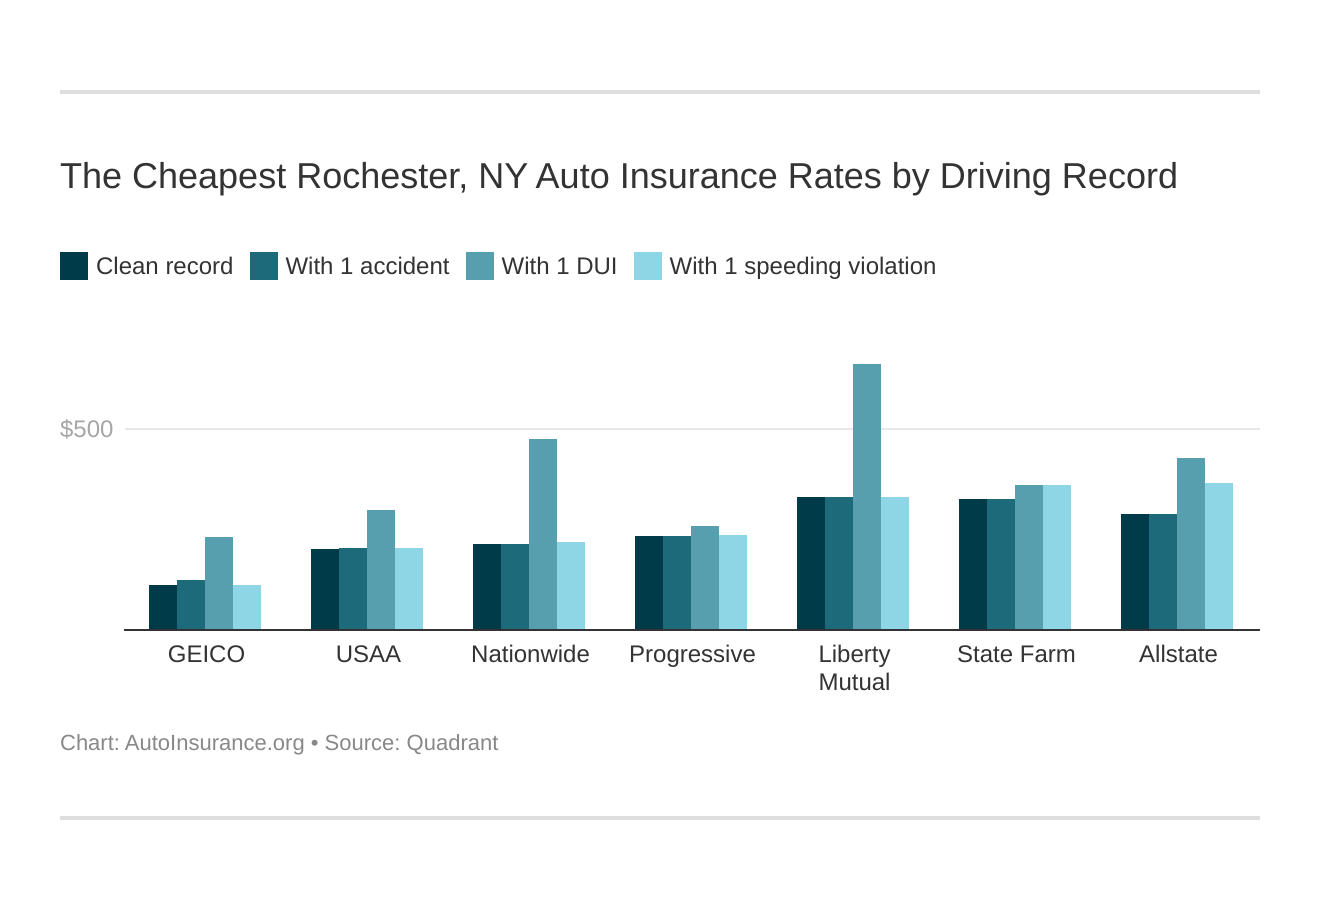 The Cheapest Rochester, NY Auto Insurance Rates by Driving Record